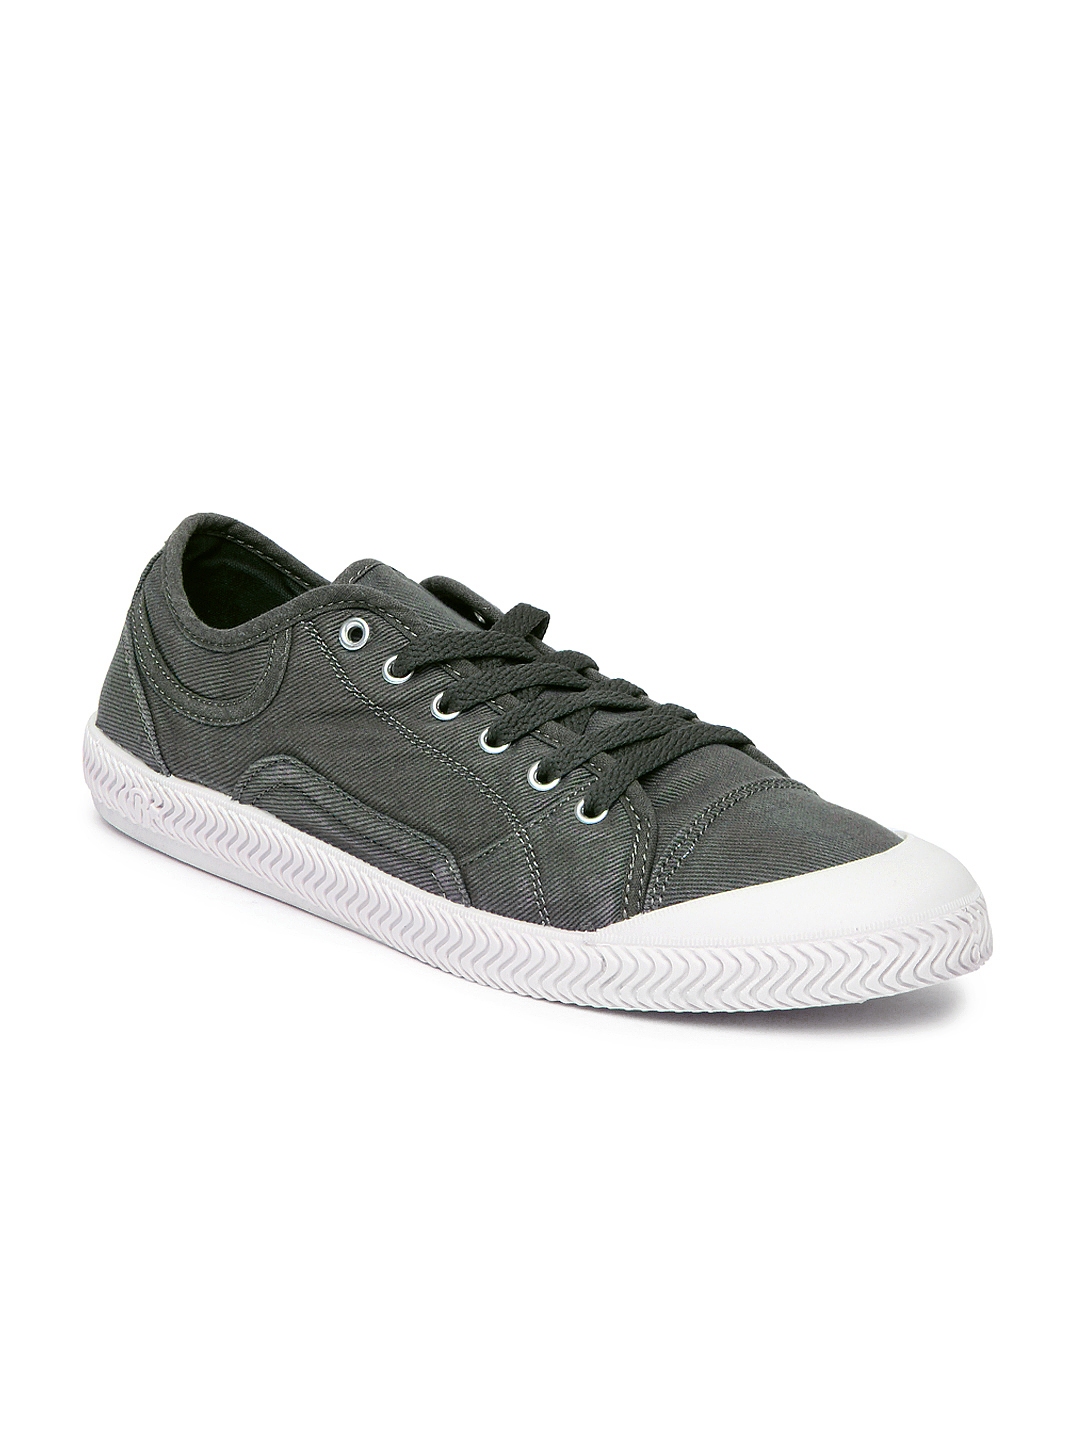 Buy Roadster Men Grey Casual Shoes Casual Shoes For Men 346050 Myntra 1129